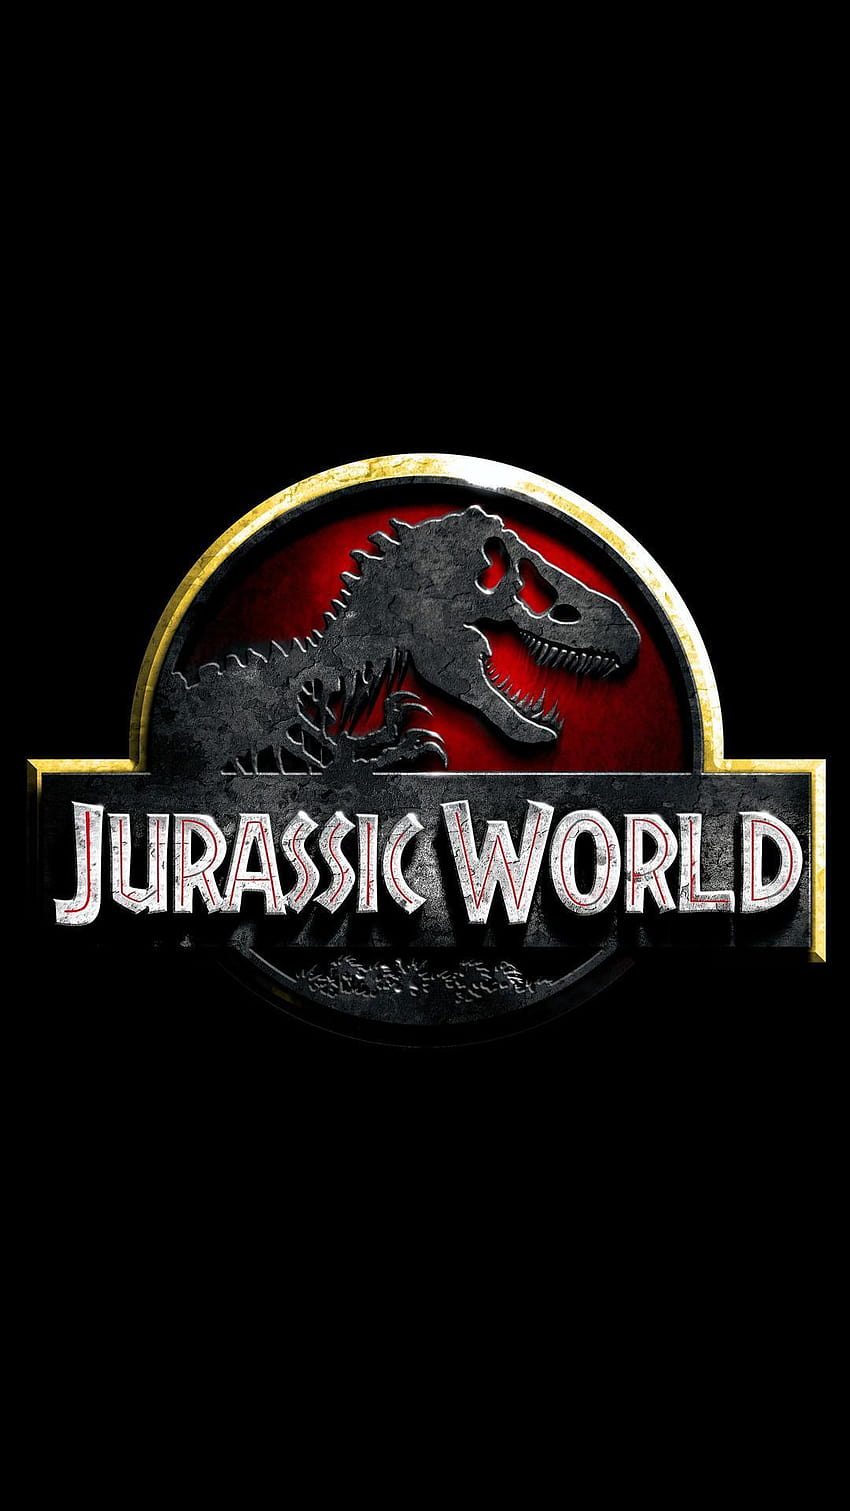 Jurassic World for Android, jurassic park iphone HD phone wallpaper